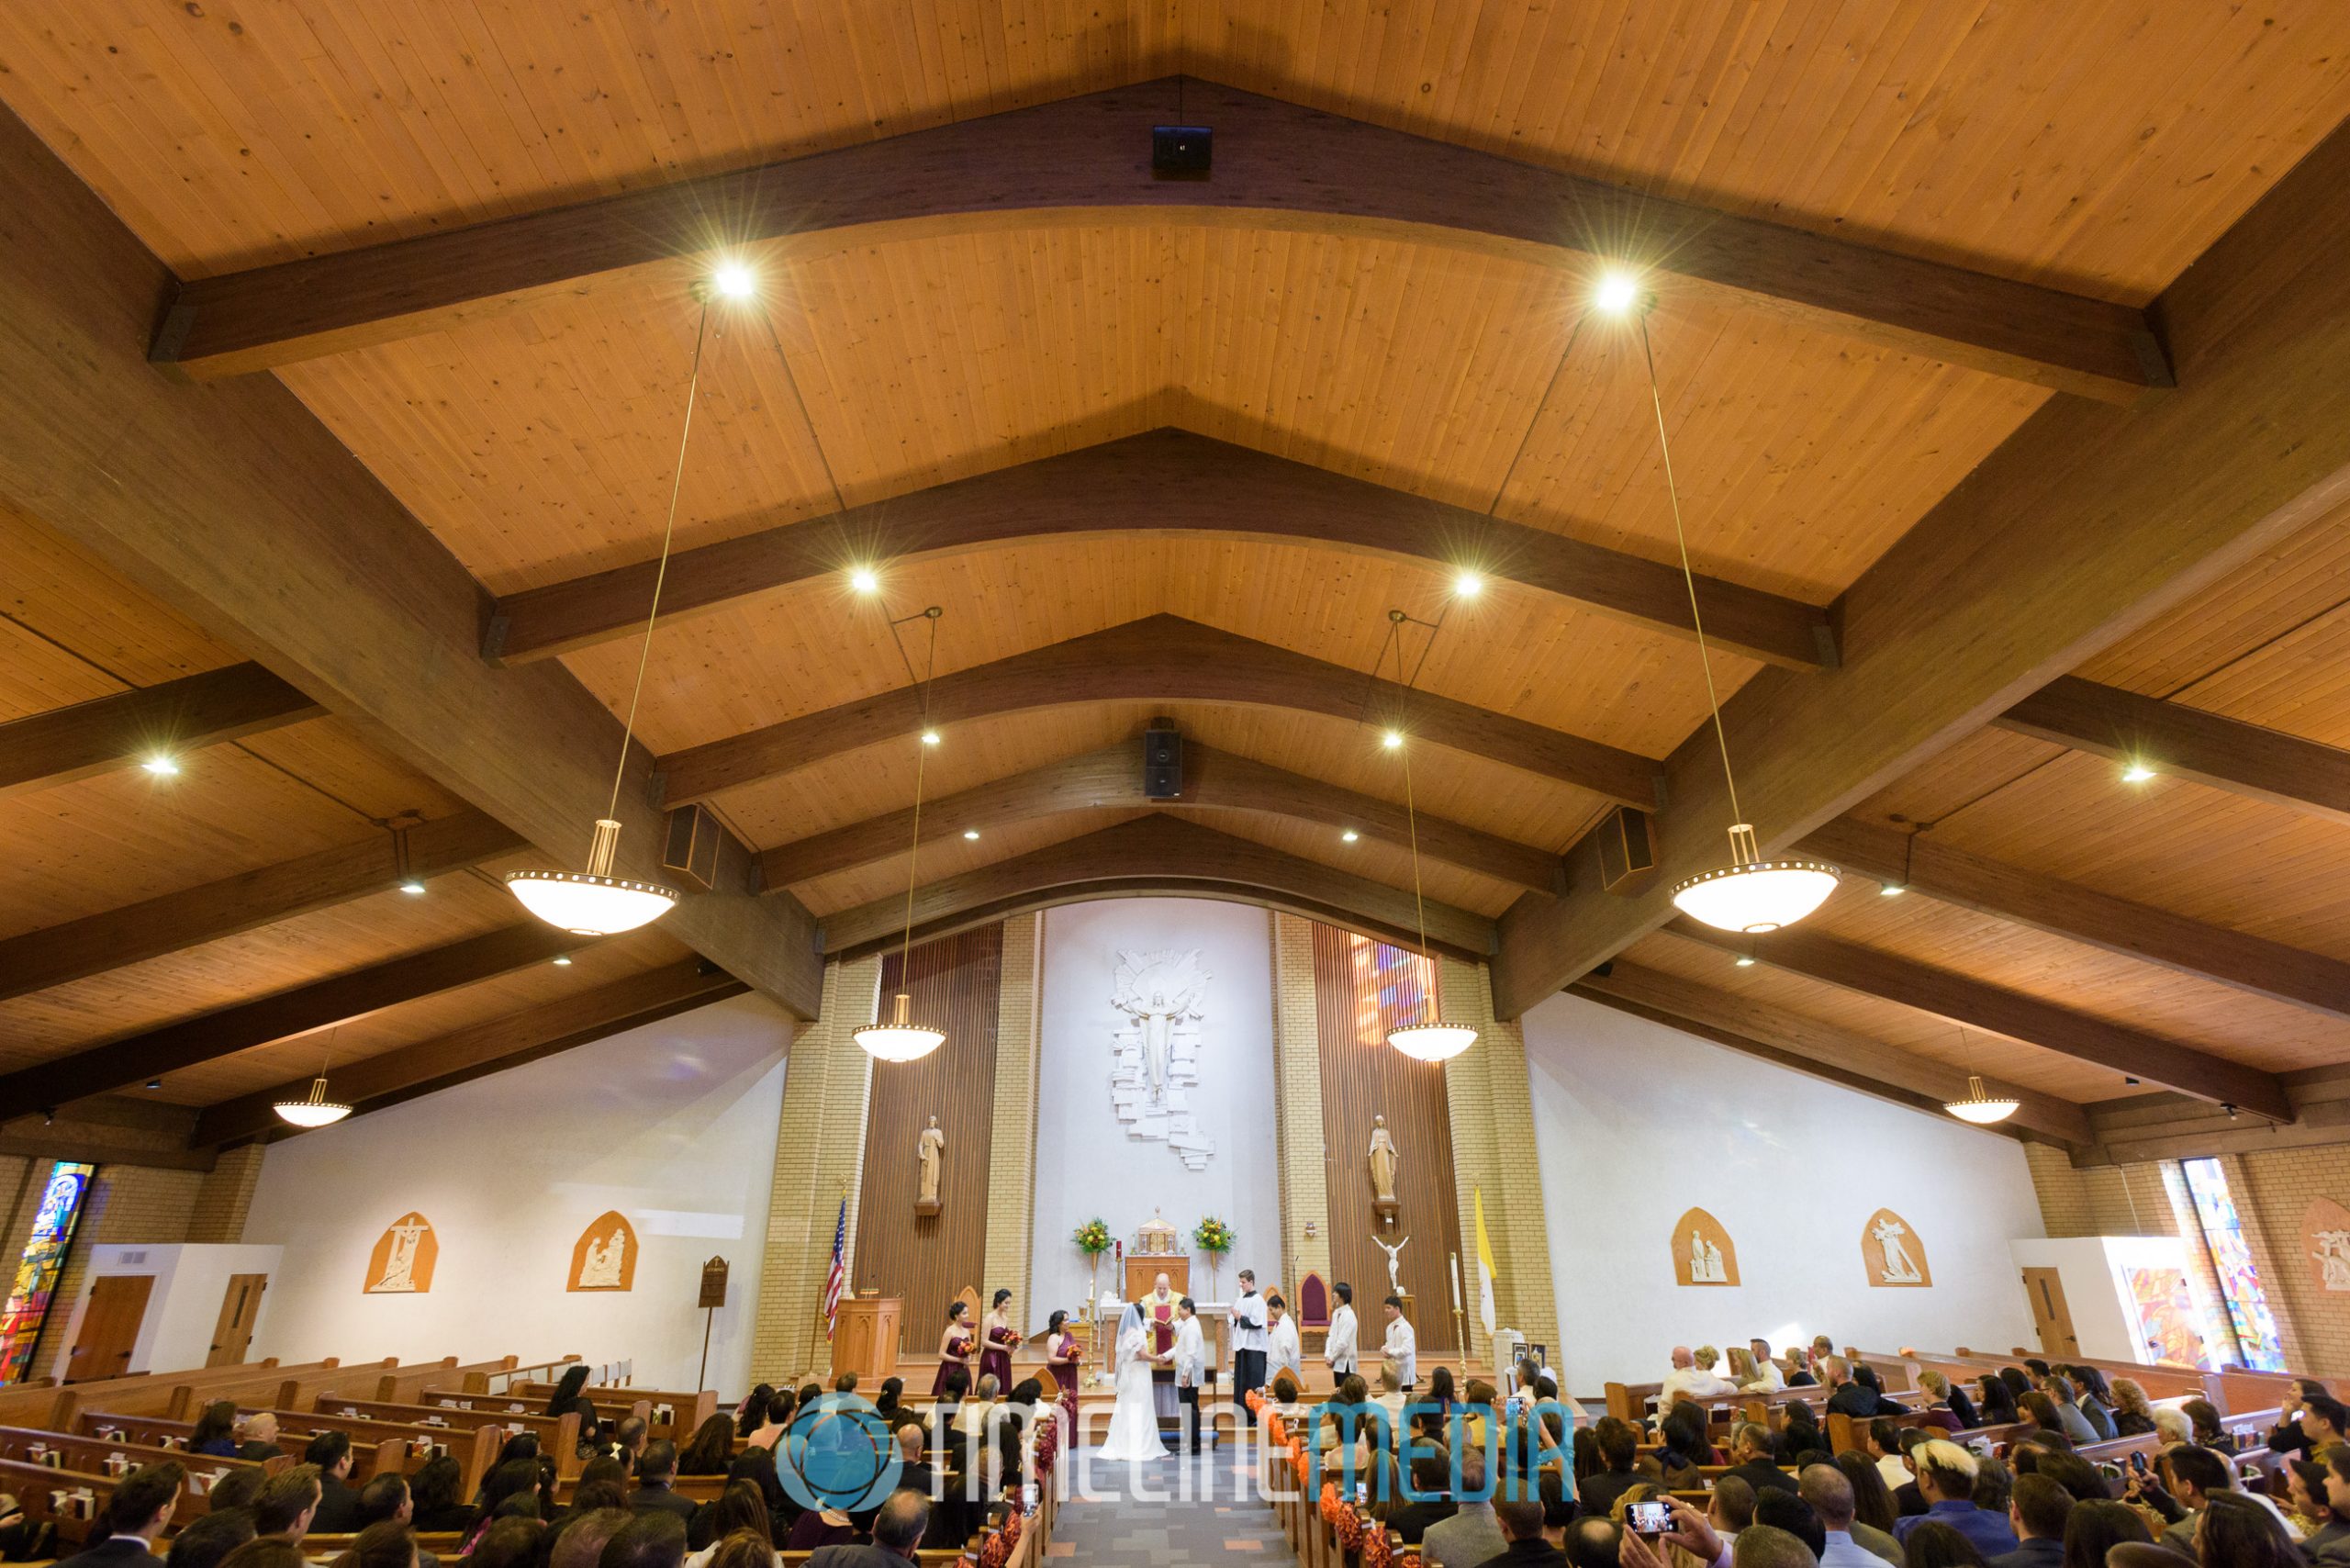 Jo and Claro's wedding at Our Lady of Angels Church in Woodbridge, VA ©TimeLine Media